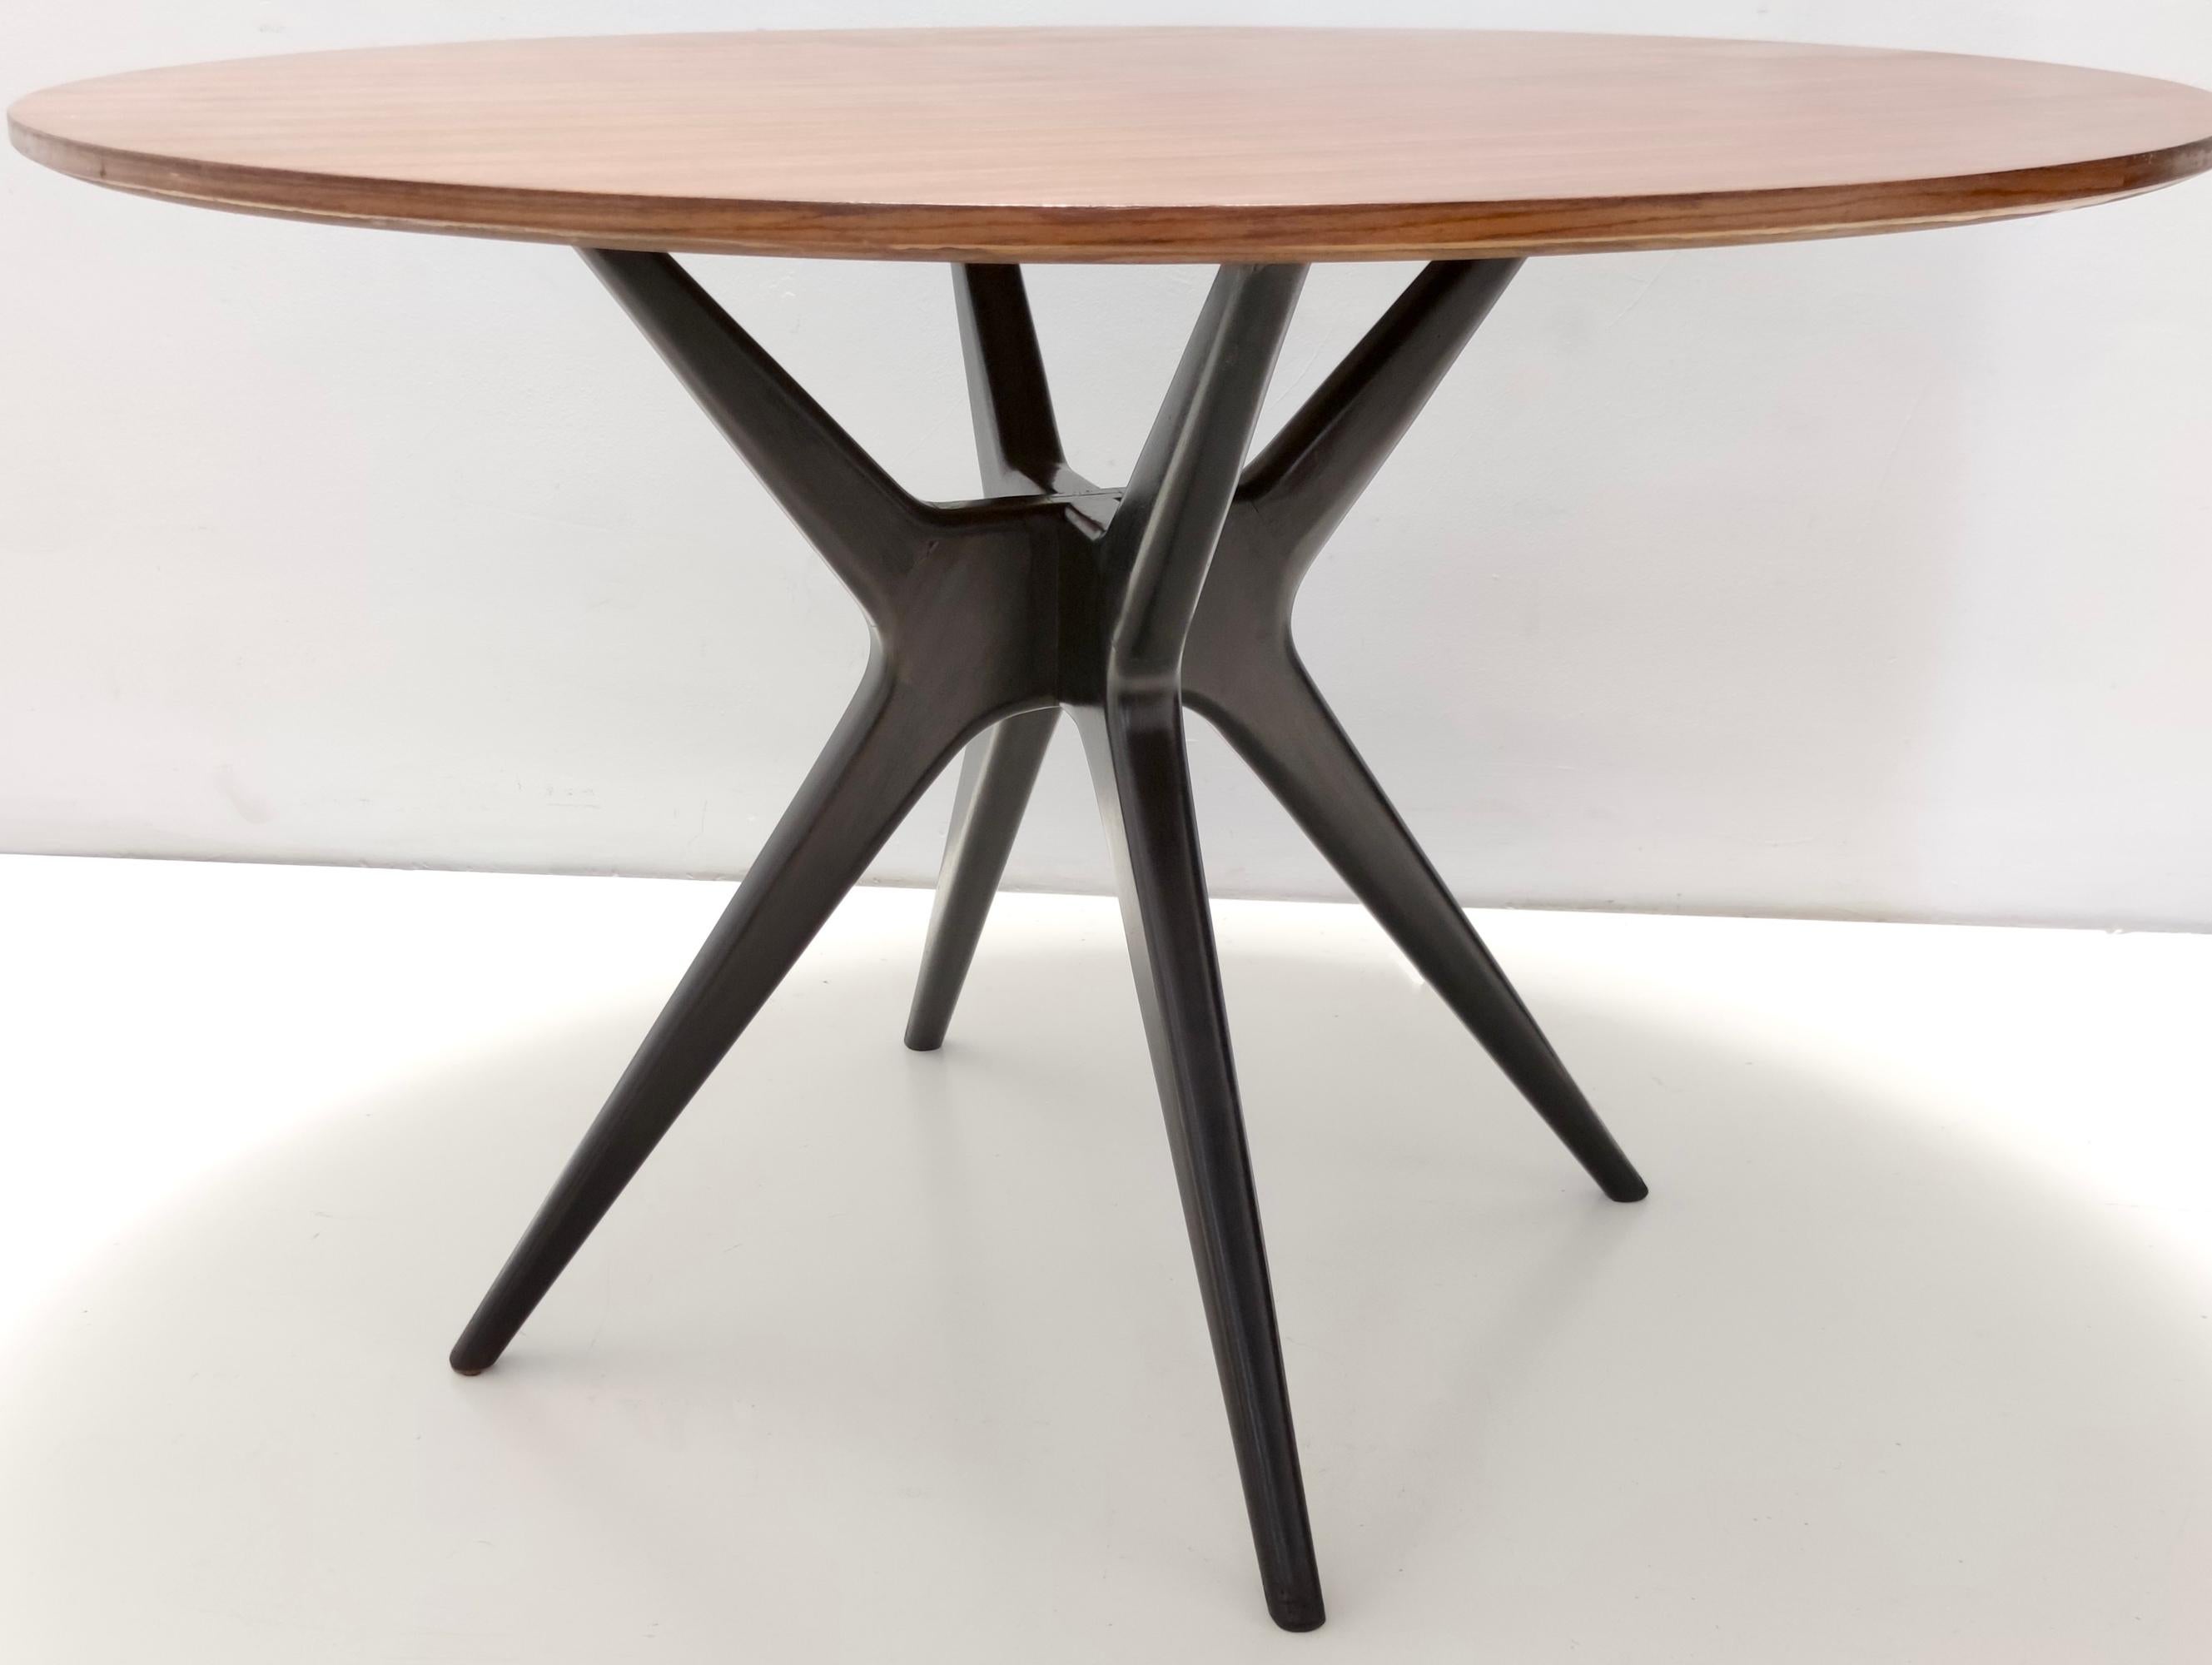 Italian Round Ebonized Walnut and Beech Dining Table in the style of Ico Parisi, Italy